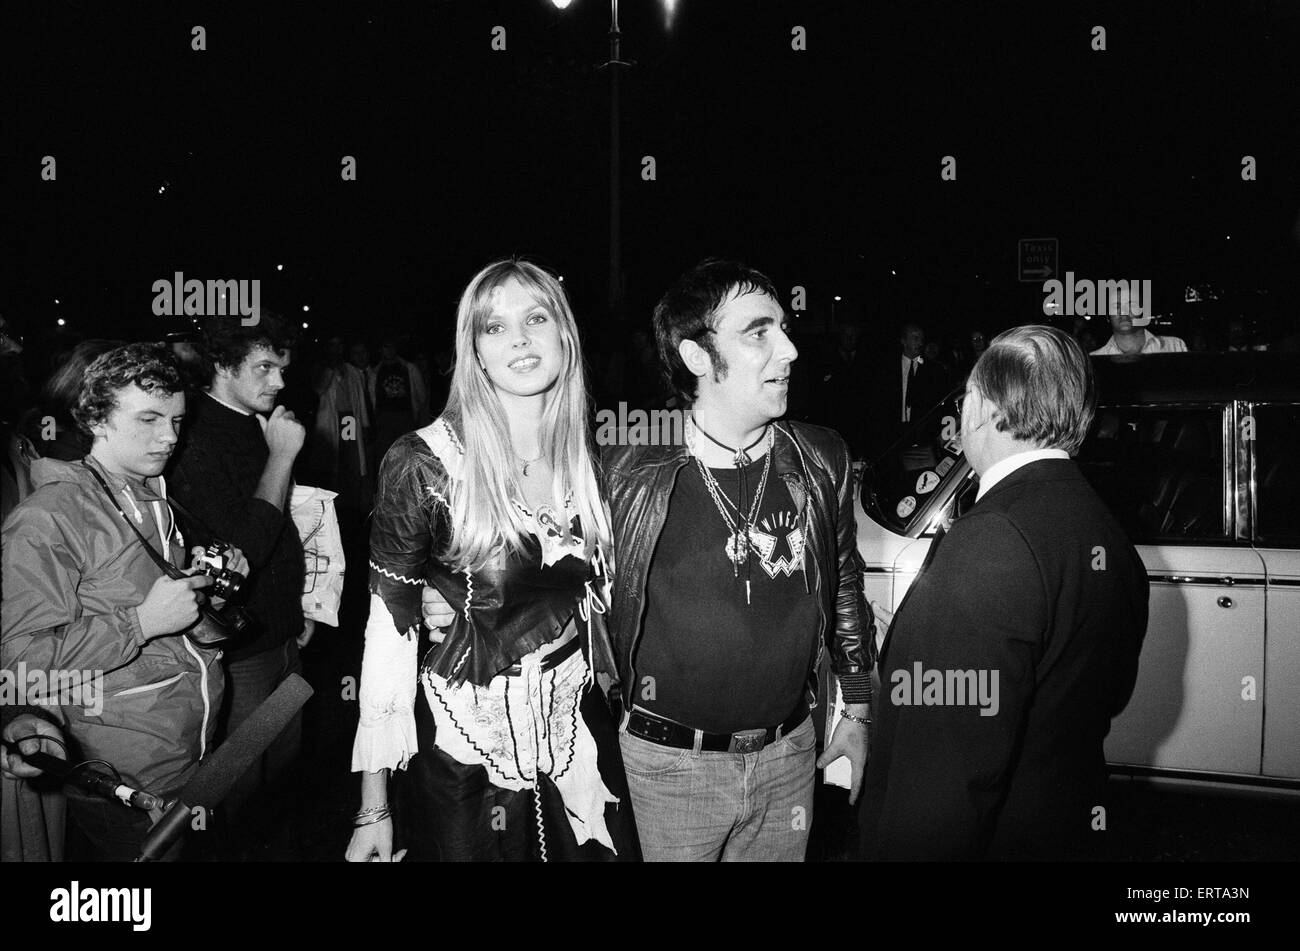 Keith Moon, drummer of the British rock group The Who, attending the  premier of the new film "The  Buddy Holly Story" in the West End with fiancee Annette Walter-Lax as guests of Paul and Linda McCartney. After dining with Paul and Linda at Peppermint Park in Covent Garden, Keith and Annette returned to their flat in Curzon Street, Mayfair where he was found dead early the next morning after overdosing on 32 tablets of clomethiazole, prescribed to Moon to alleviate his alcohol withdrawal symptoms.    6th September 1978. Stock Photo